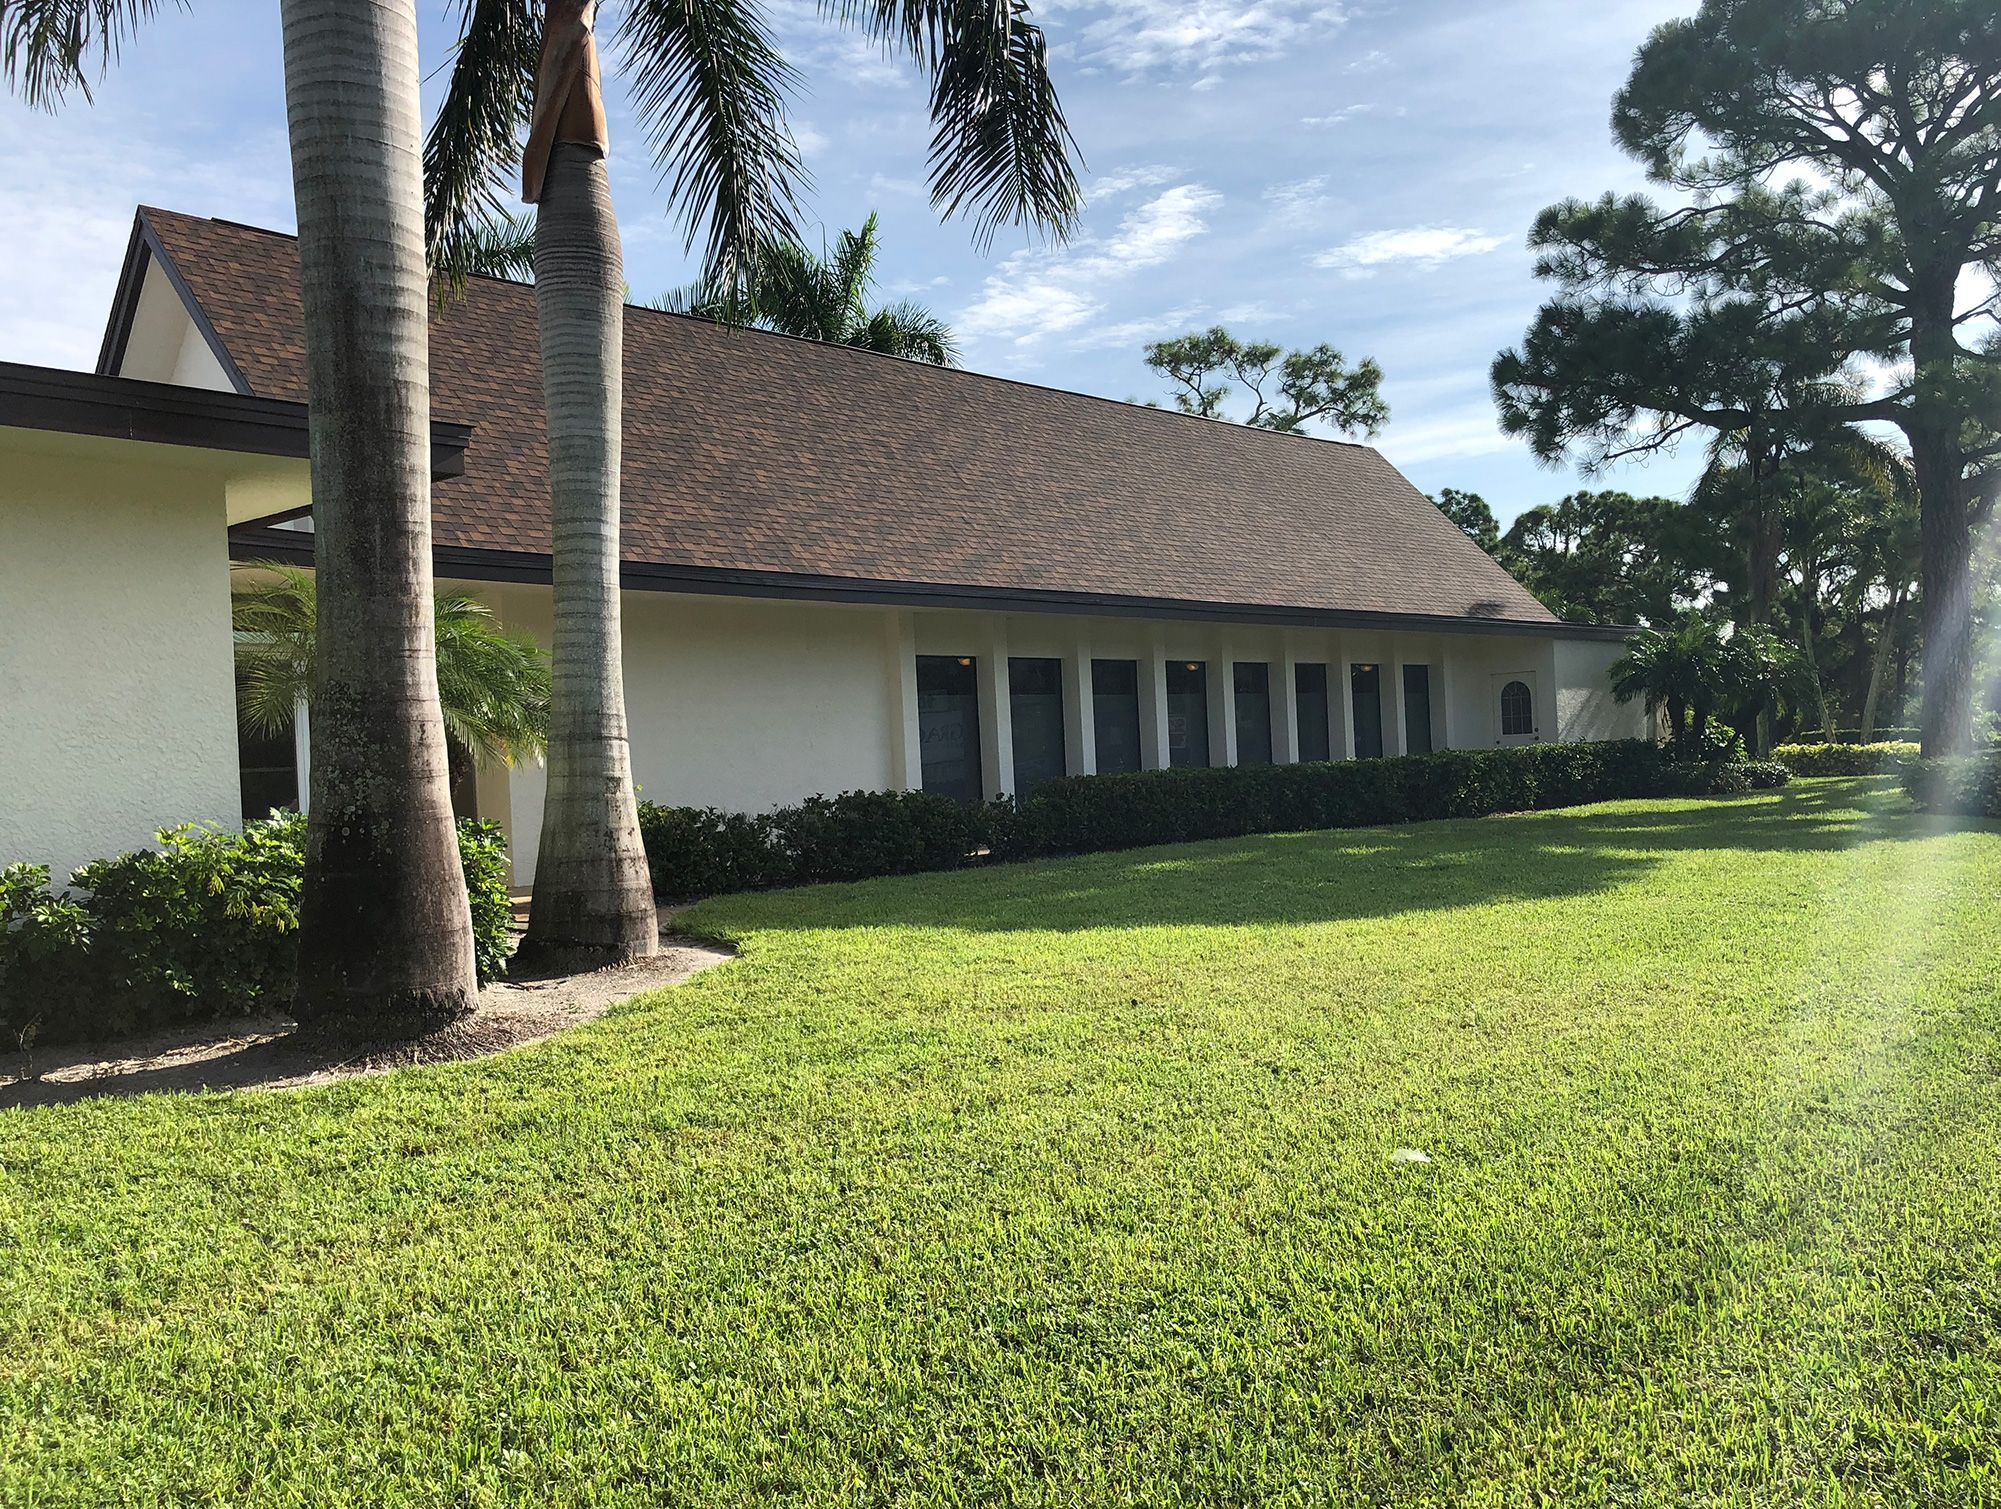 Commercial Church Painting in Naples, Florida